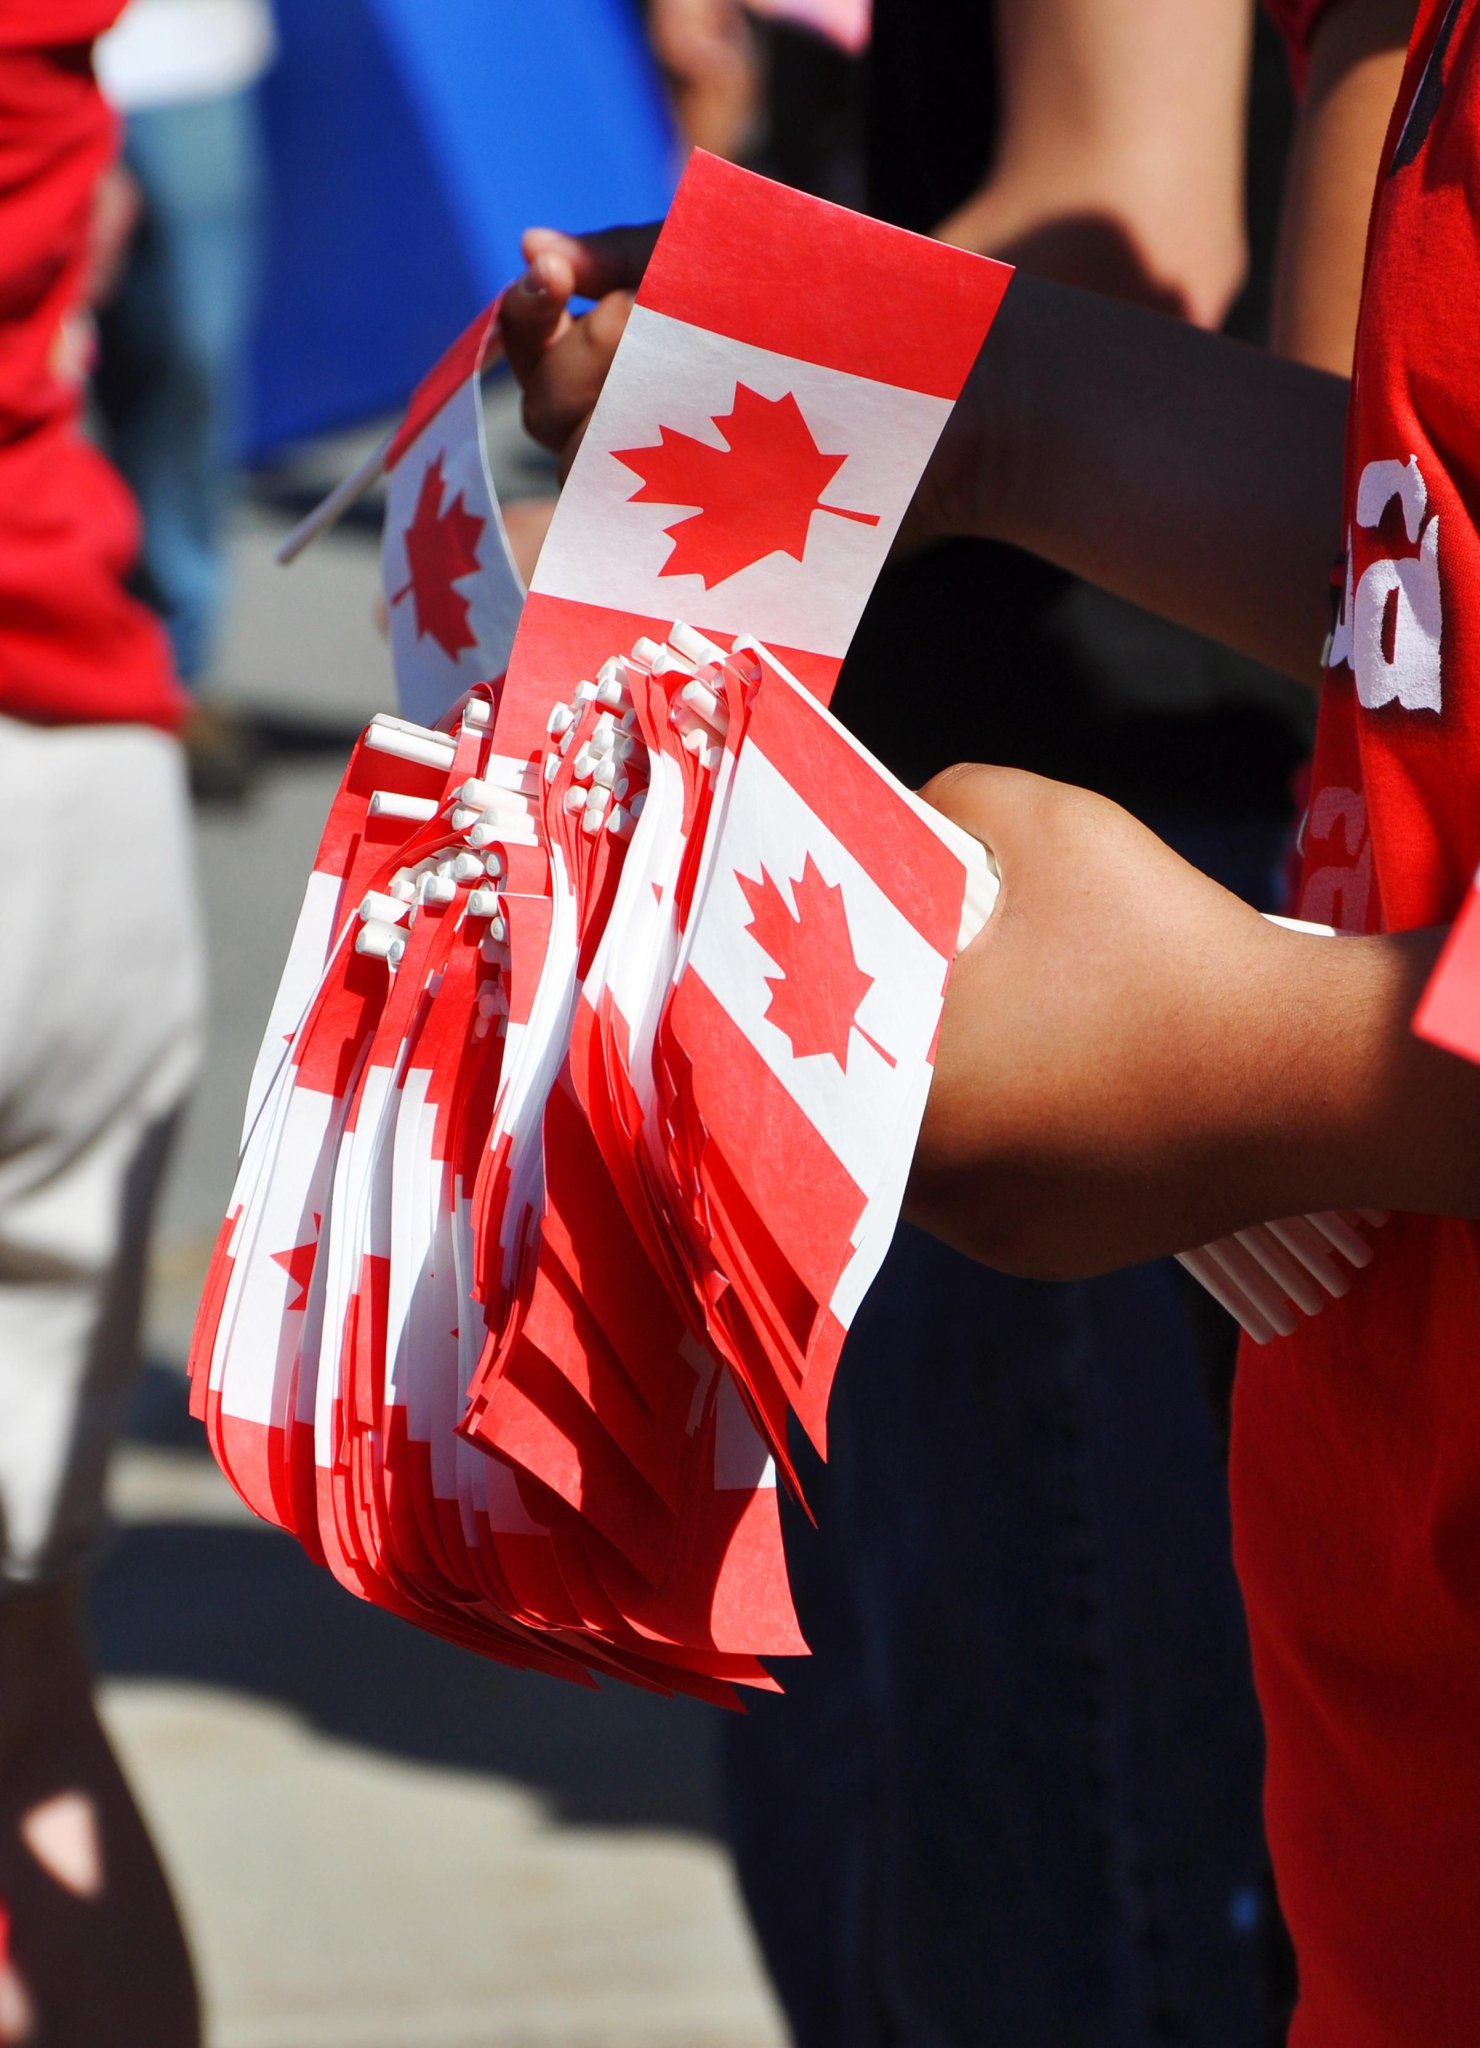 A Redditor Asked Why It's So Hard To Make Friends With Canadians & The Answers Are Surprising